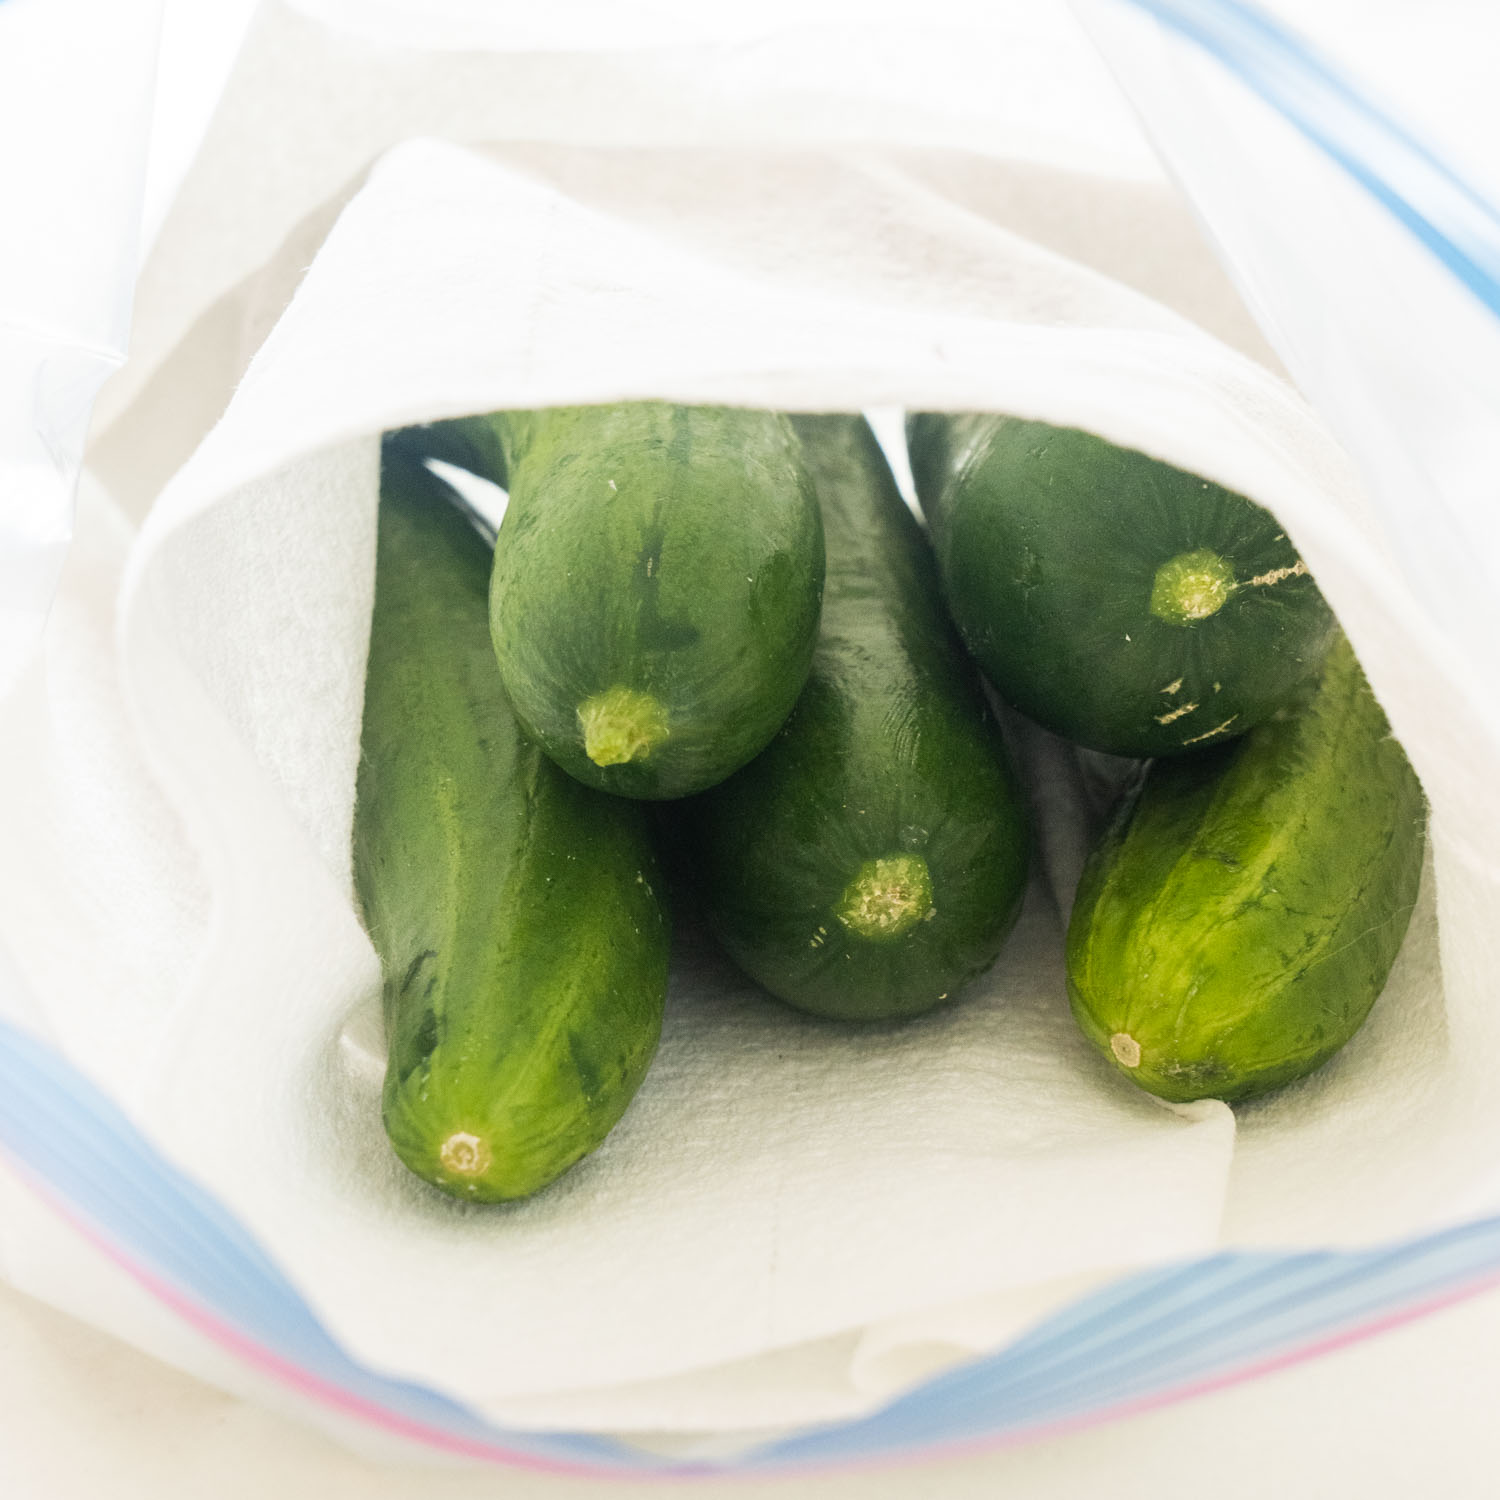 How to store cucumbers?